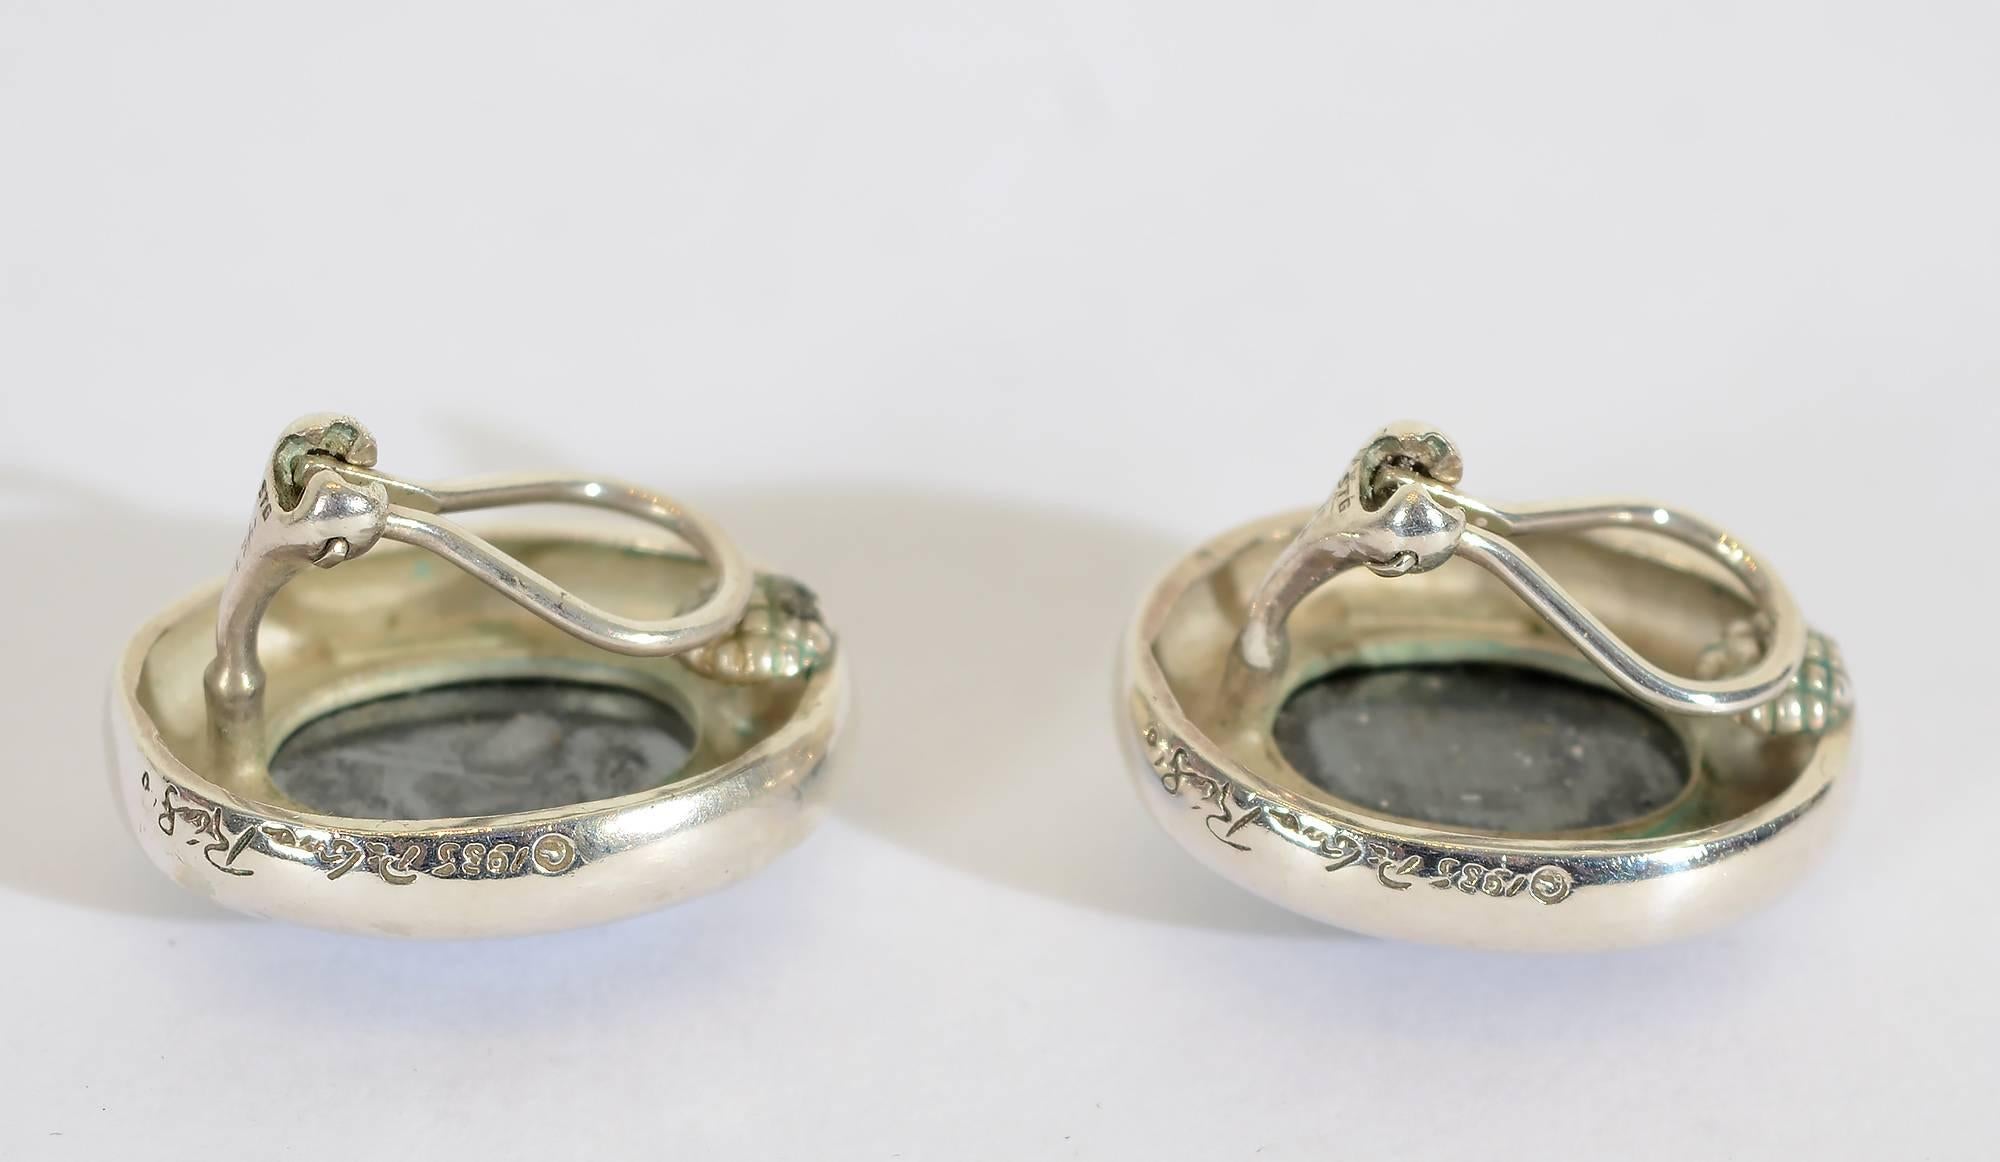 Bold and striking silver earrings with hematite by Pablo Picasso's youngest daughter, Paloma. They are signed Paloma Picasso and dated 1985. The earrings measure 1 inch in length and 3/4 inch in width. Clip backs can be converted to posts; excellent